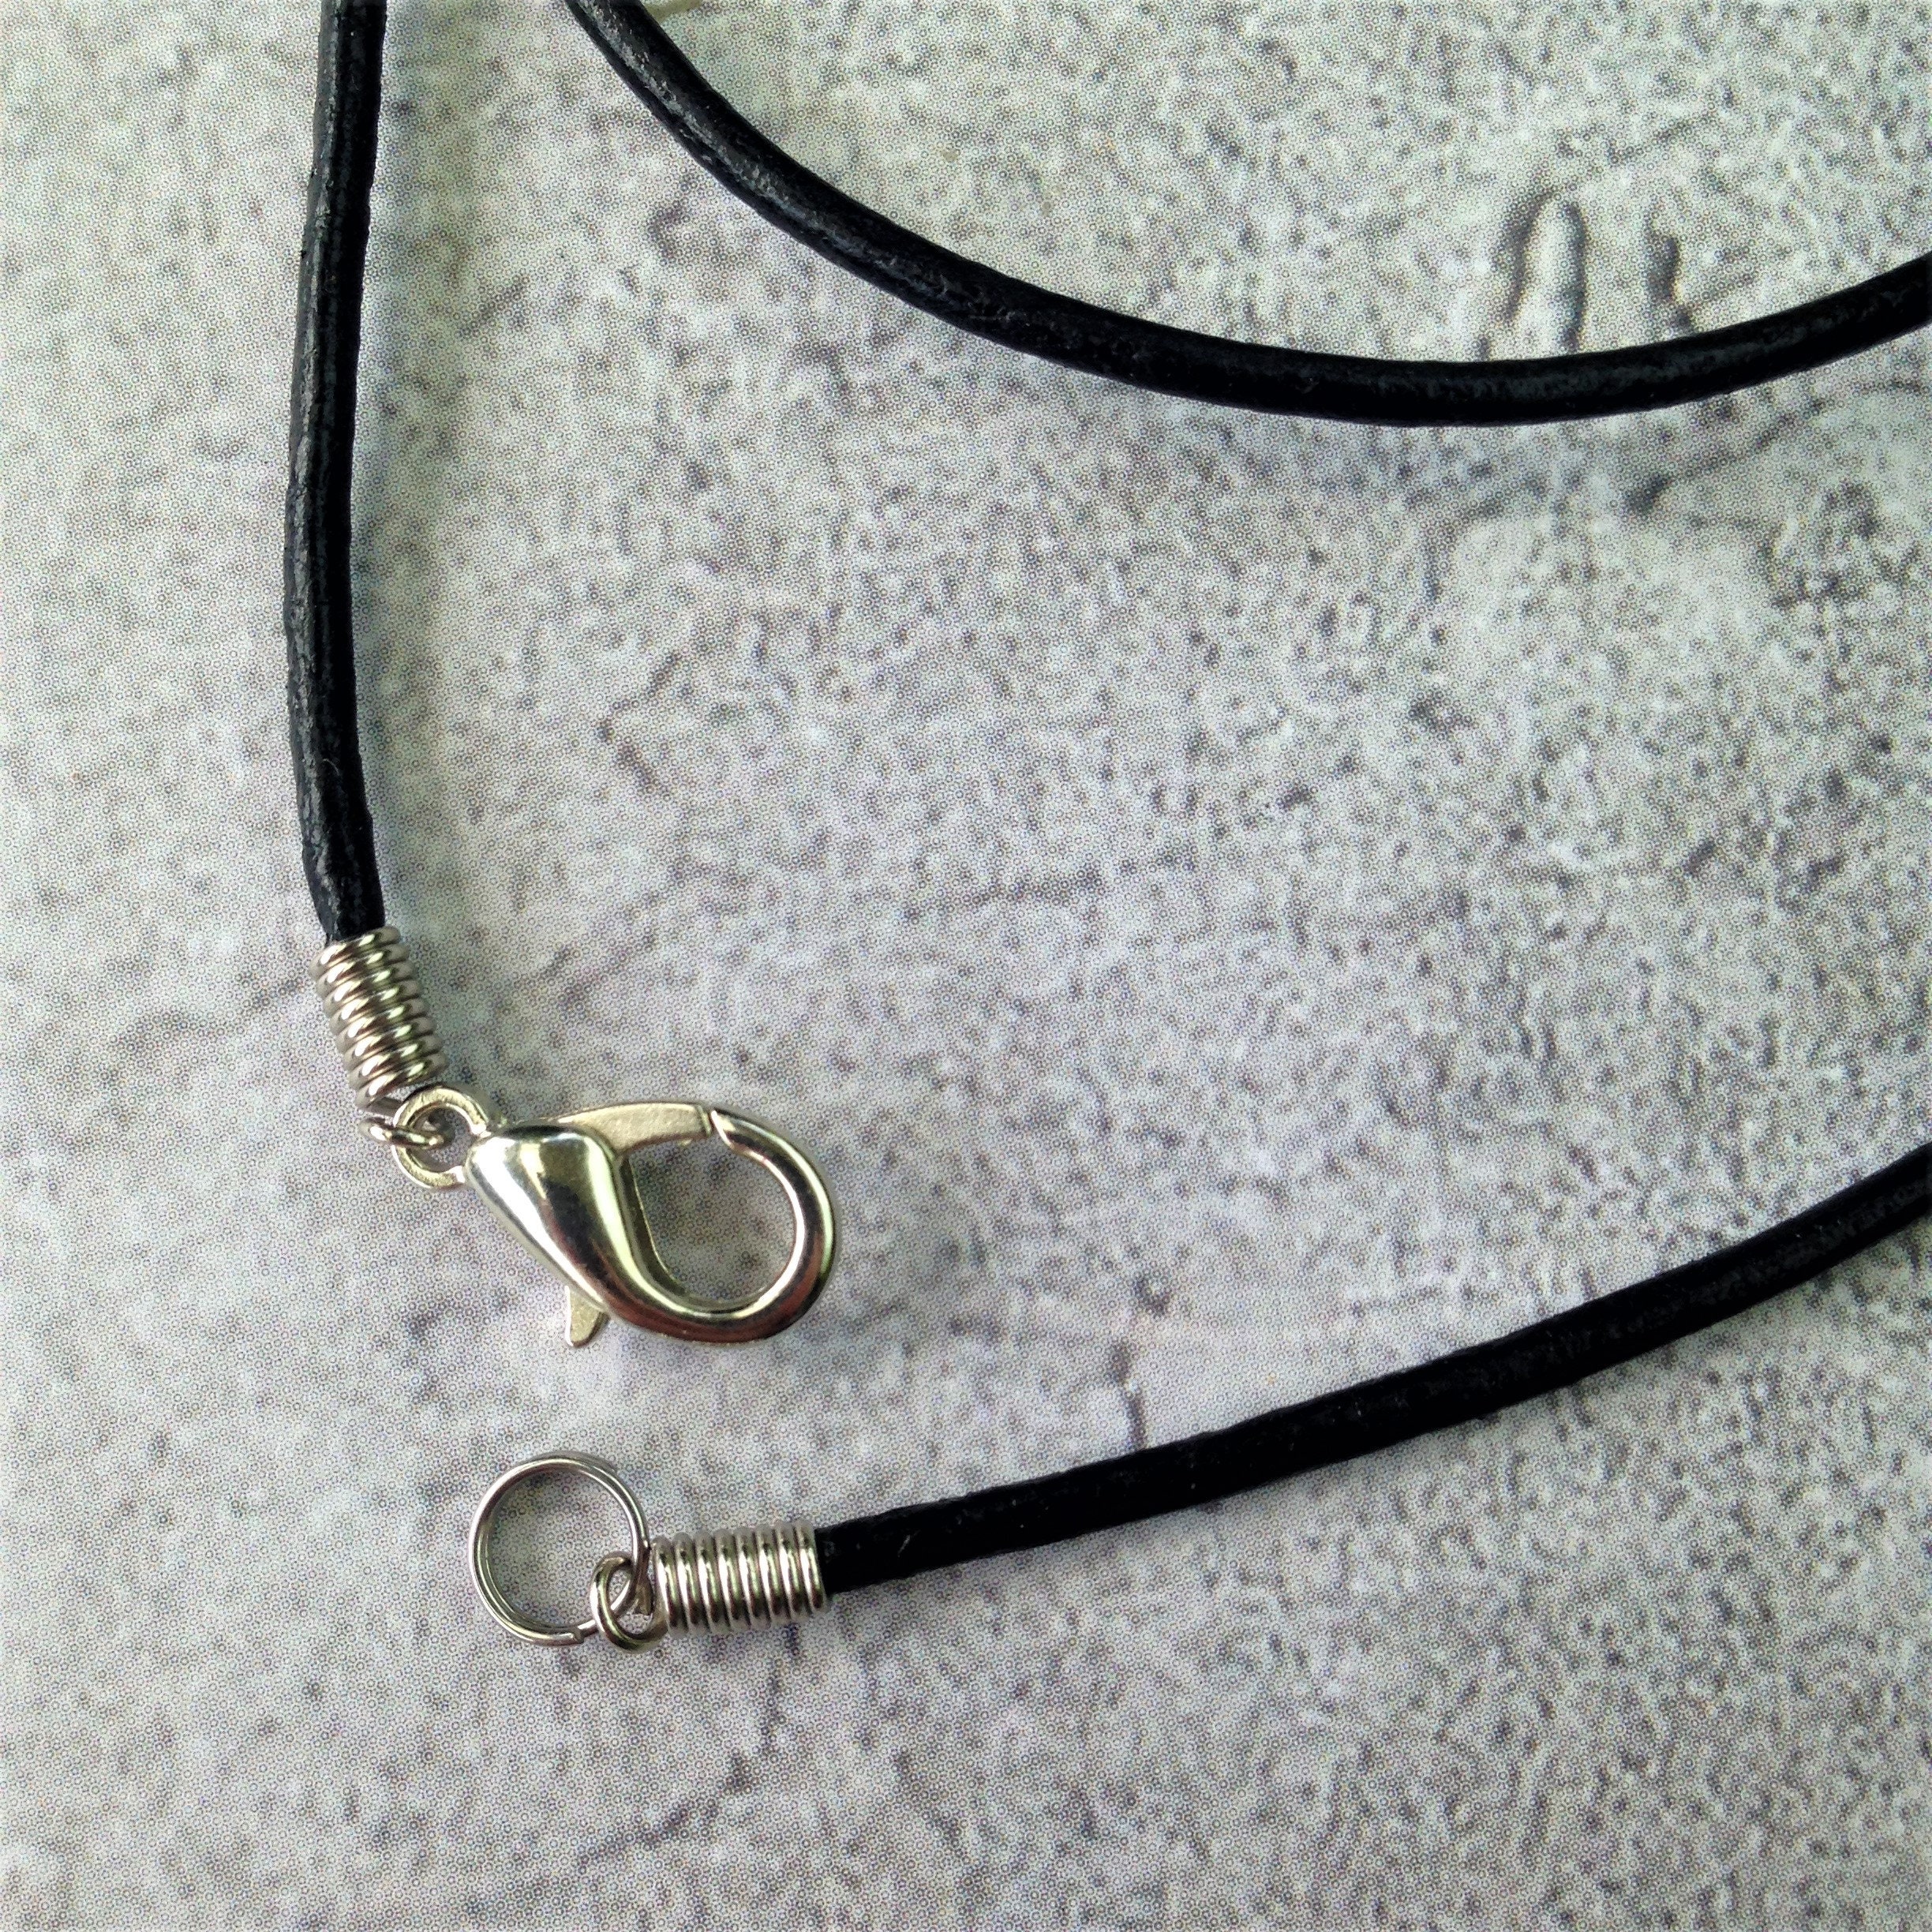 Leather Necklace-1.5mm Leather Cording with Sterling Silver Lobster Clasp-Olive-16 Inches - Tamara Scott Designs